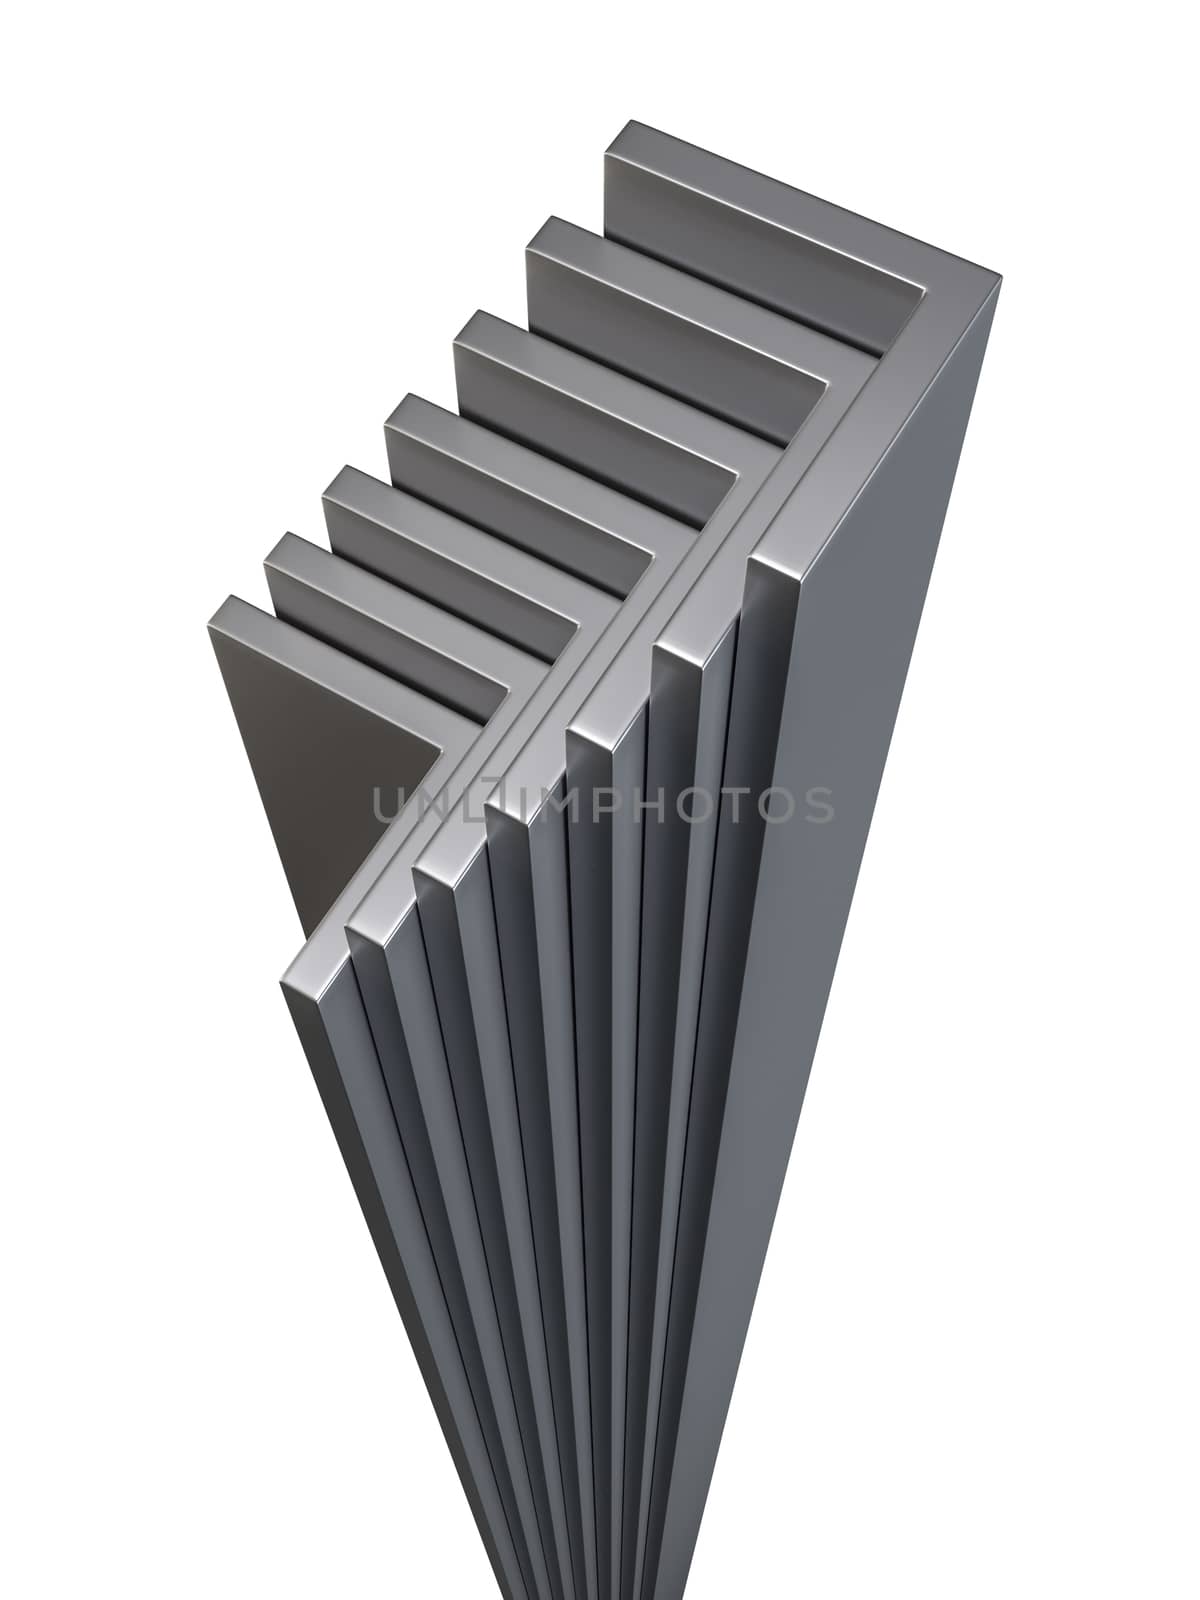 Rolled metal L-bar. Isolated on white background. 3D Rendering